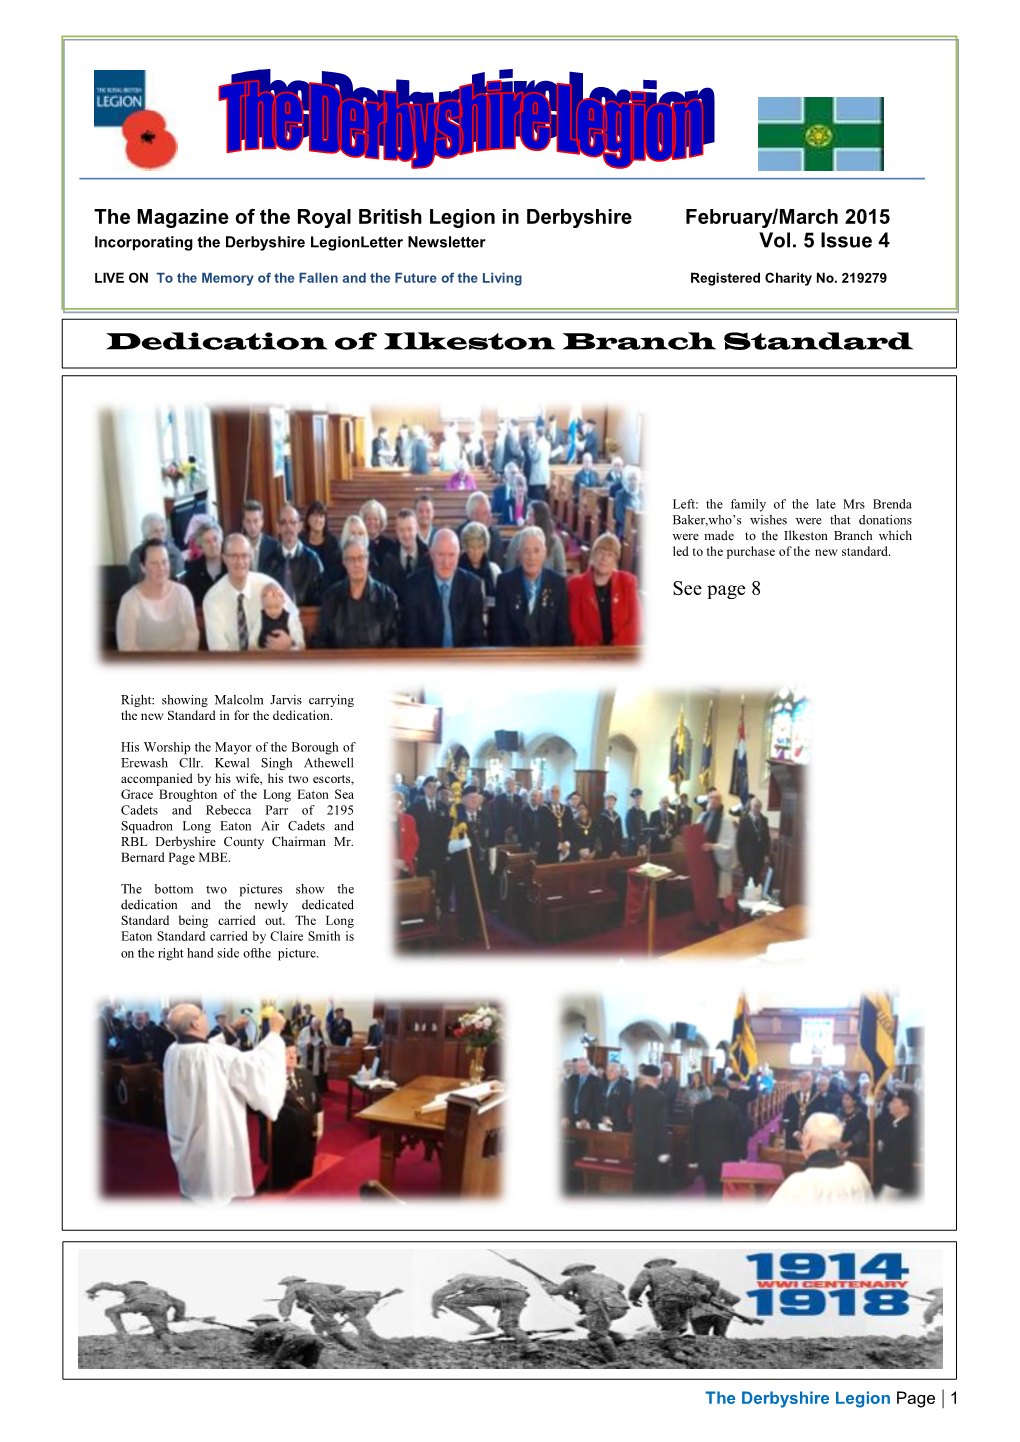 The First Derbyshire County RBL Magazine